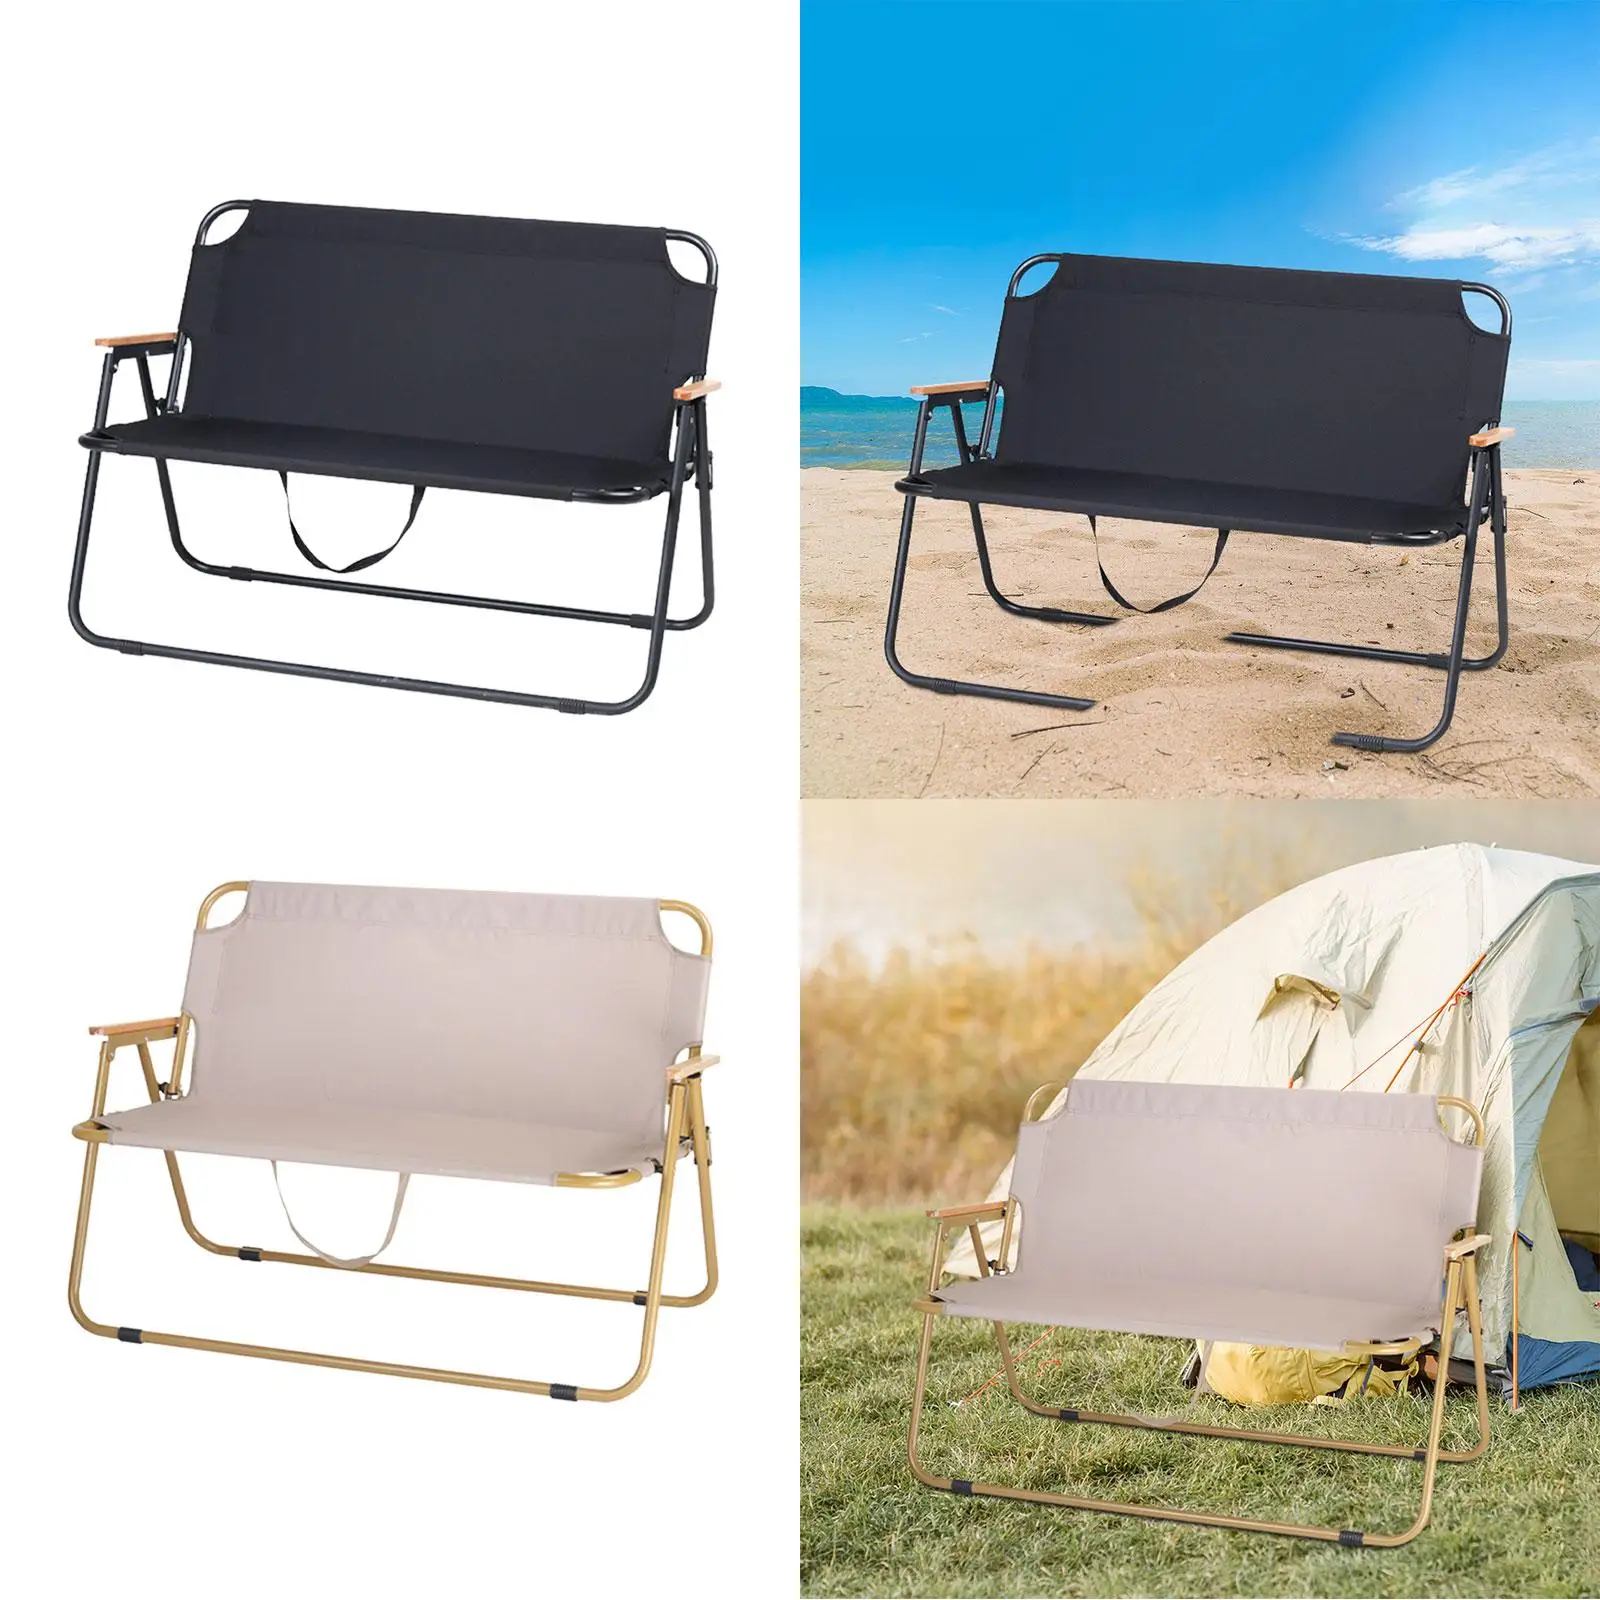 Folding Camping Chair Patio Lightweight Outdoor Travel Camping Seat Outside Camping Stool Chair Fishing Camp Chair Armchair